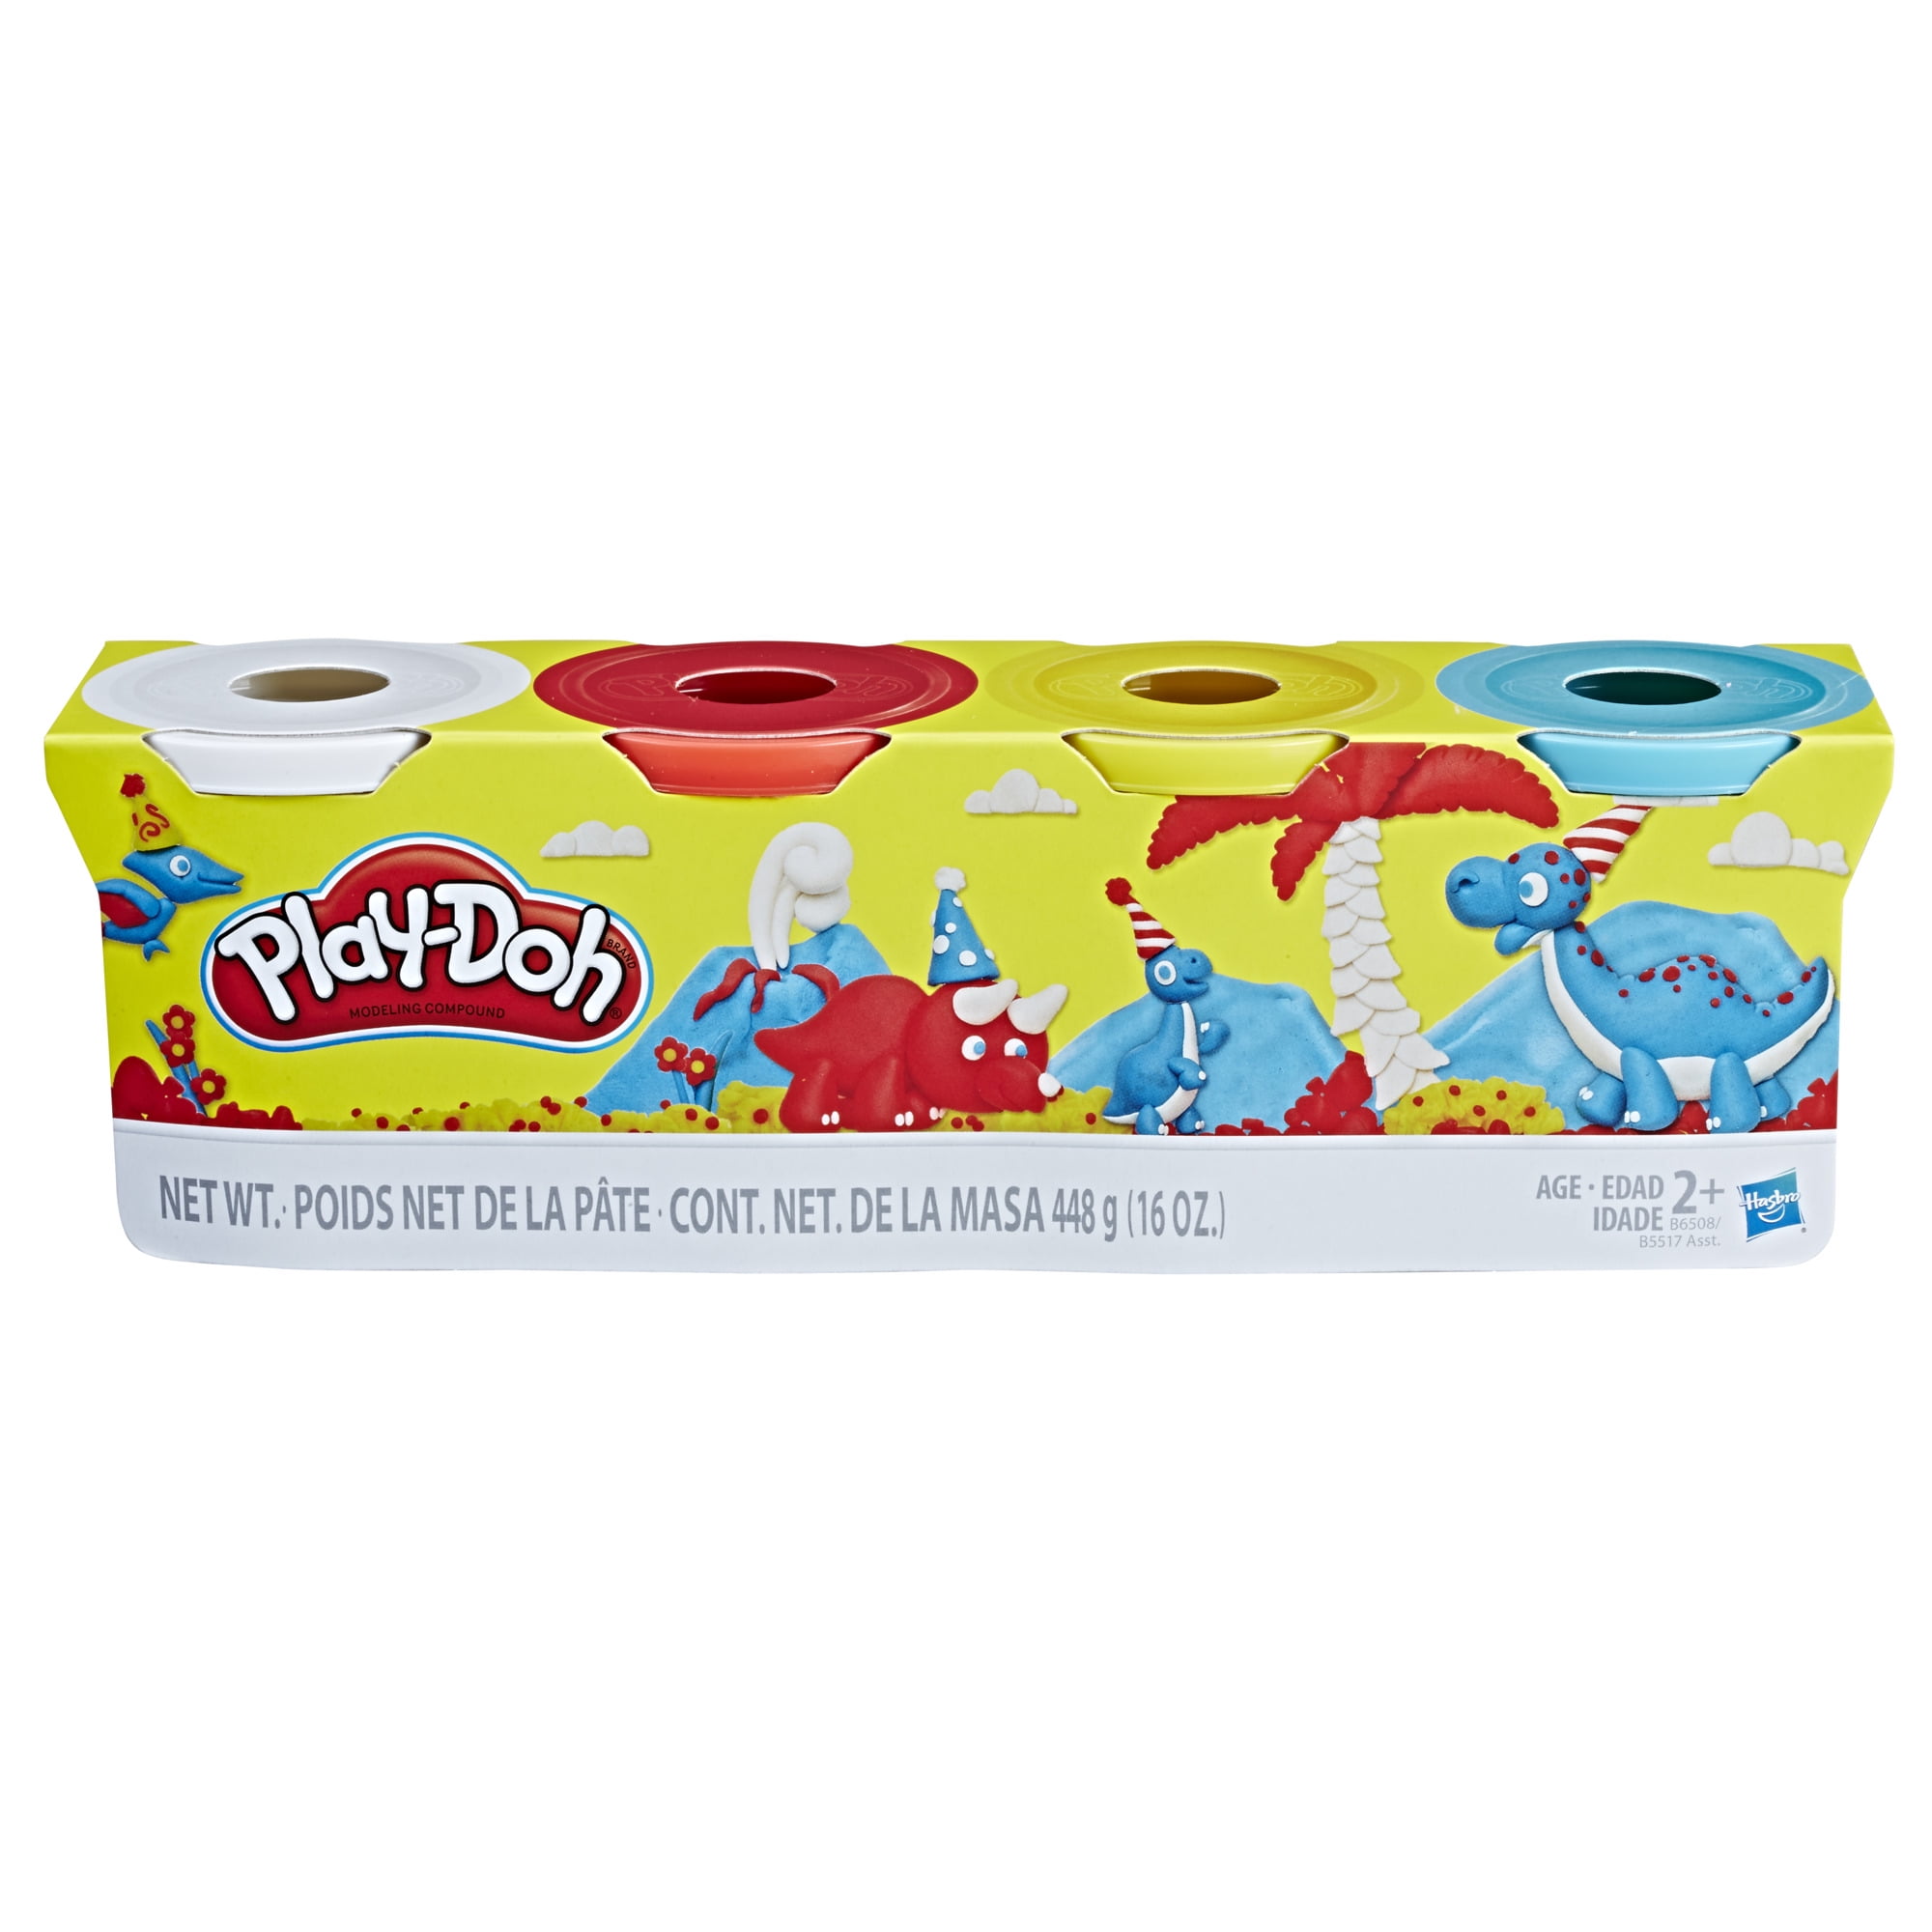 Play-Doh 4-pack of Classic Colors Net WT 16oz for sale online 